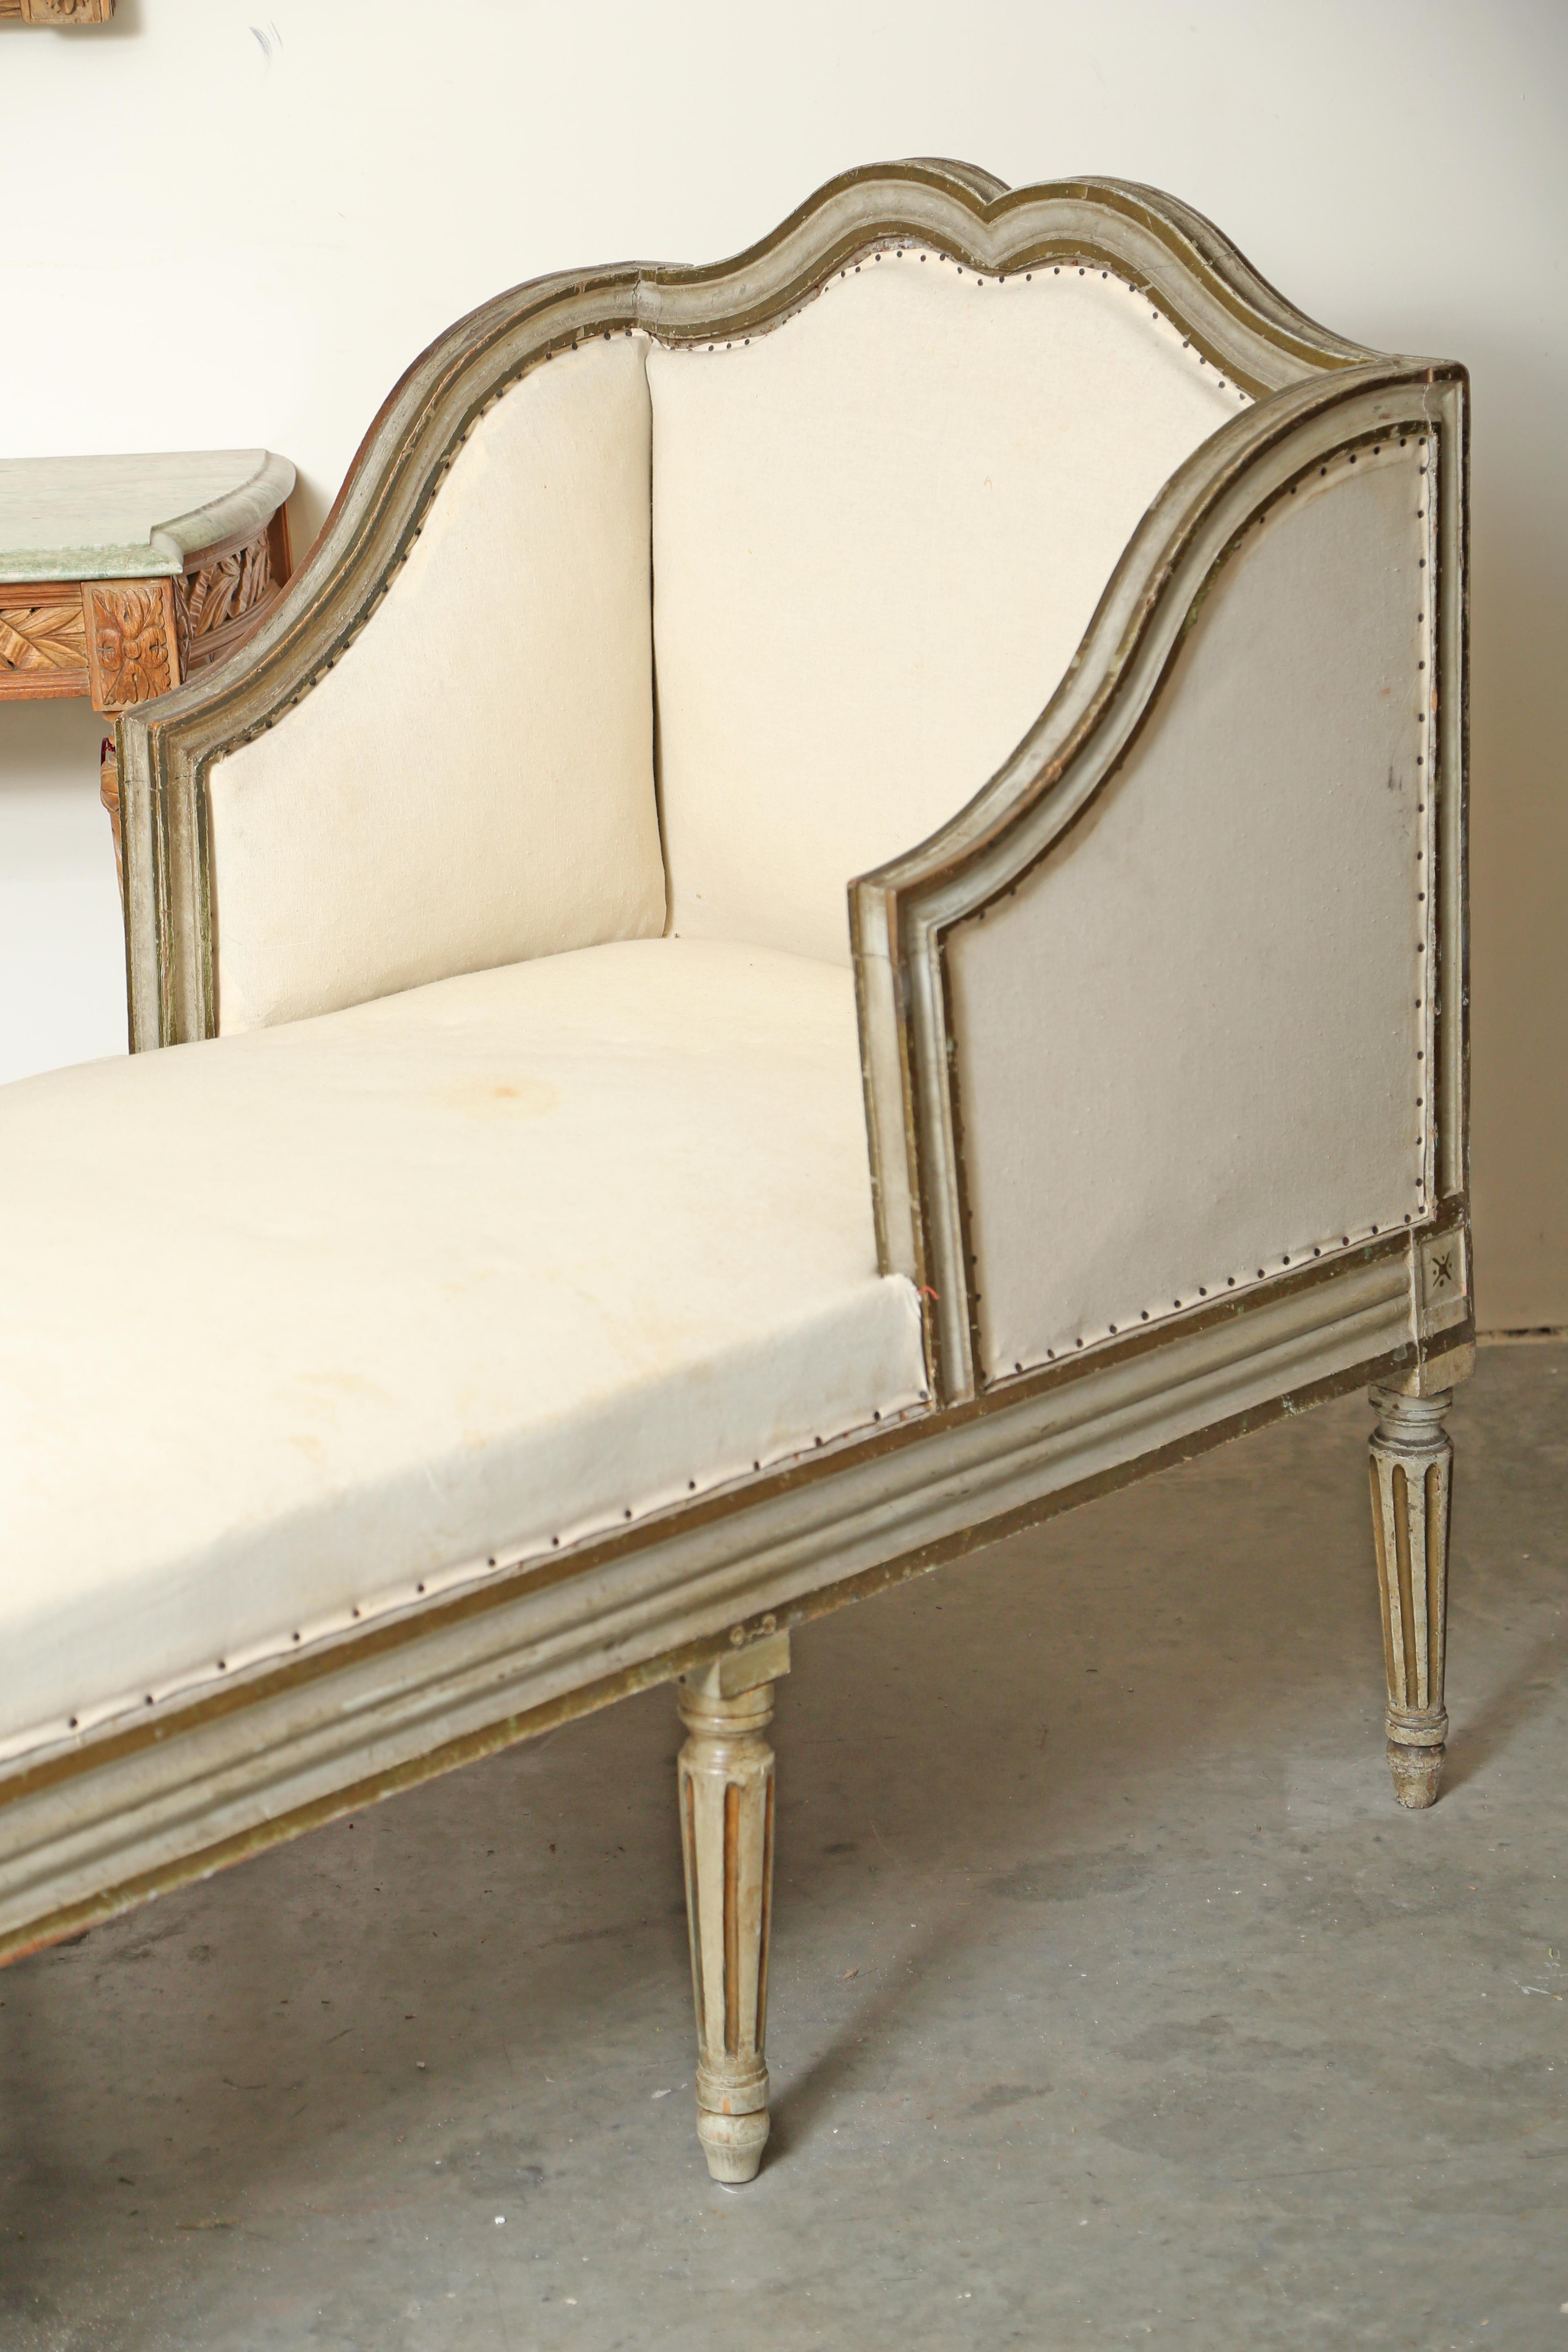 Louis XVI chaise longue either late 18th or very early 19th century. This piece remains in original paint with white muslin upholstery. It is supported by eight columnar/fluted legs. The paint is somewhat distressed as you would expect of a piece